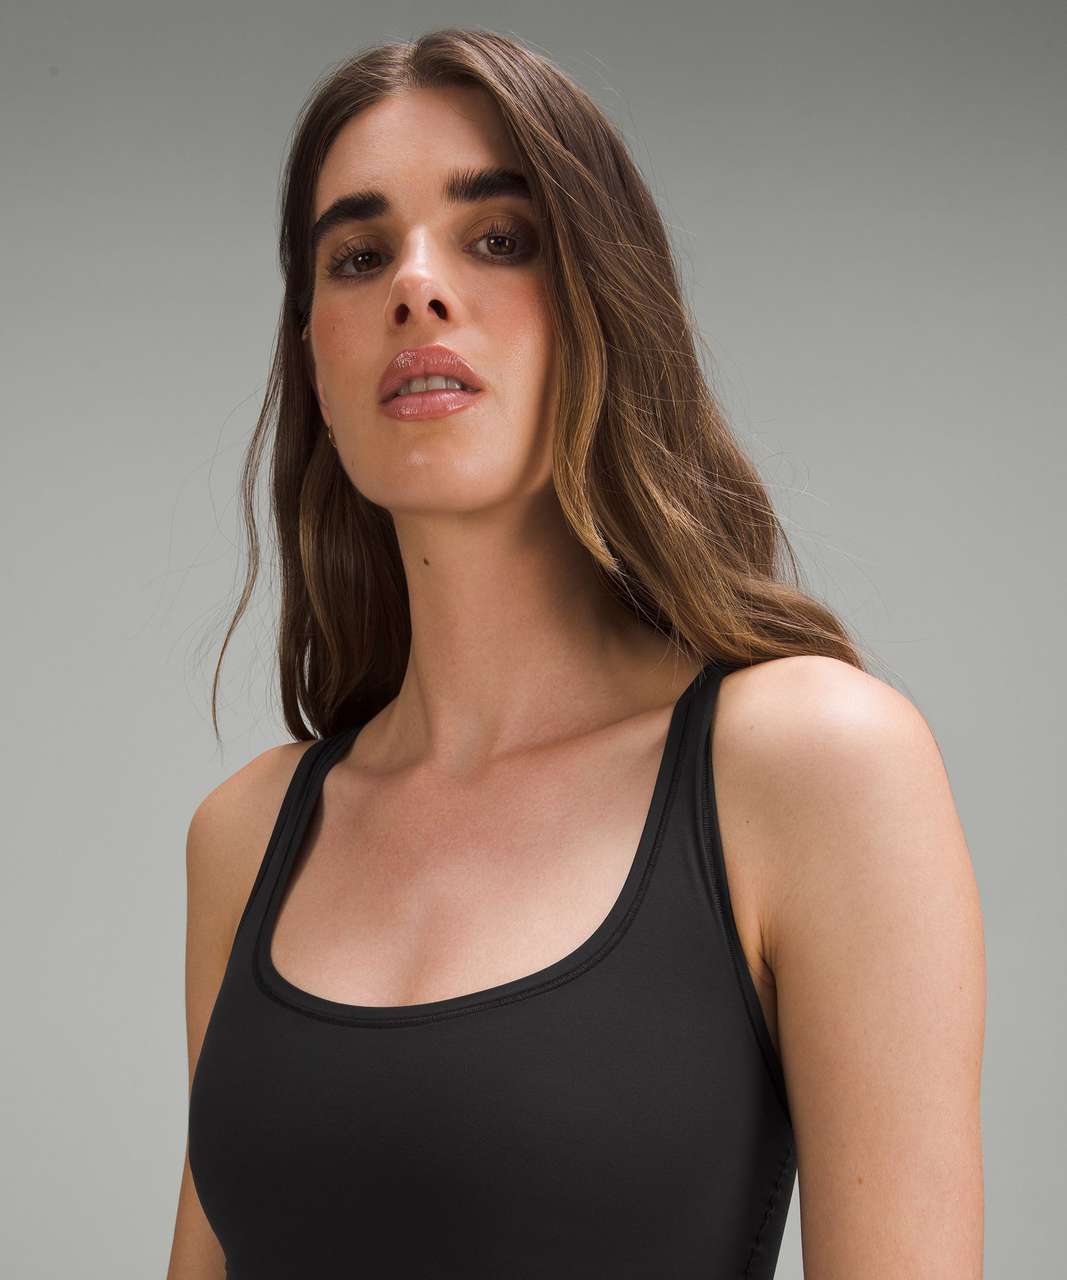 NEW Crew Neck Ultra Smooth Seamless Tank in Black $16.95 Free